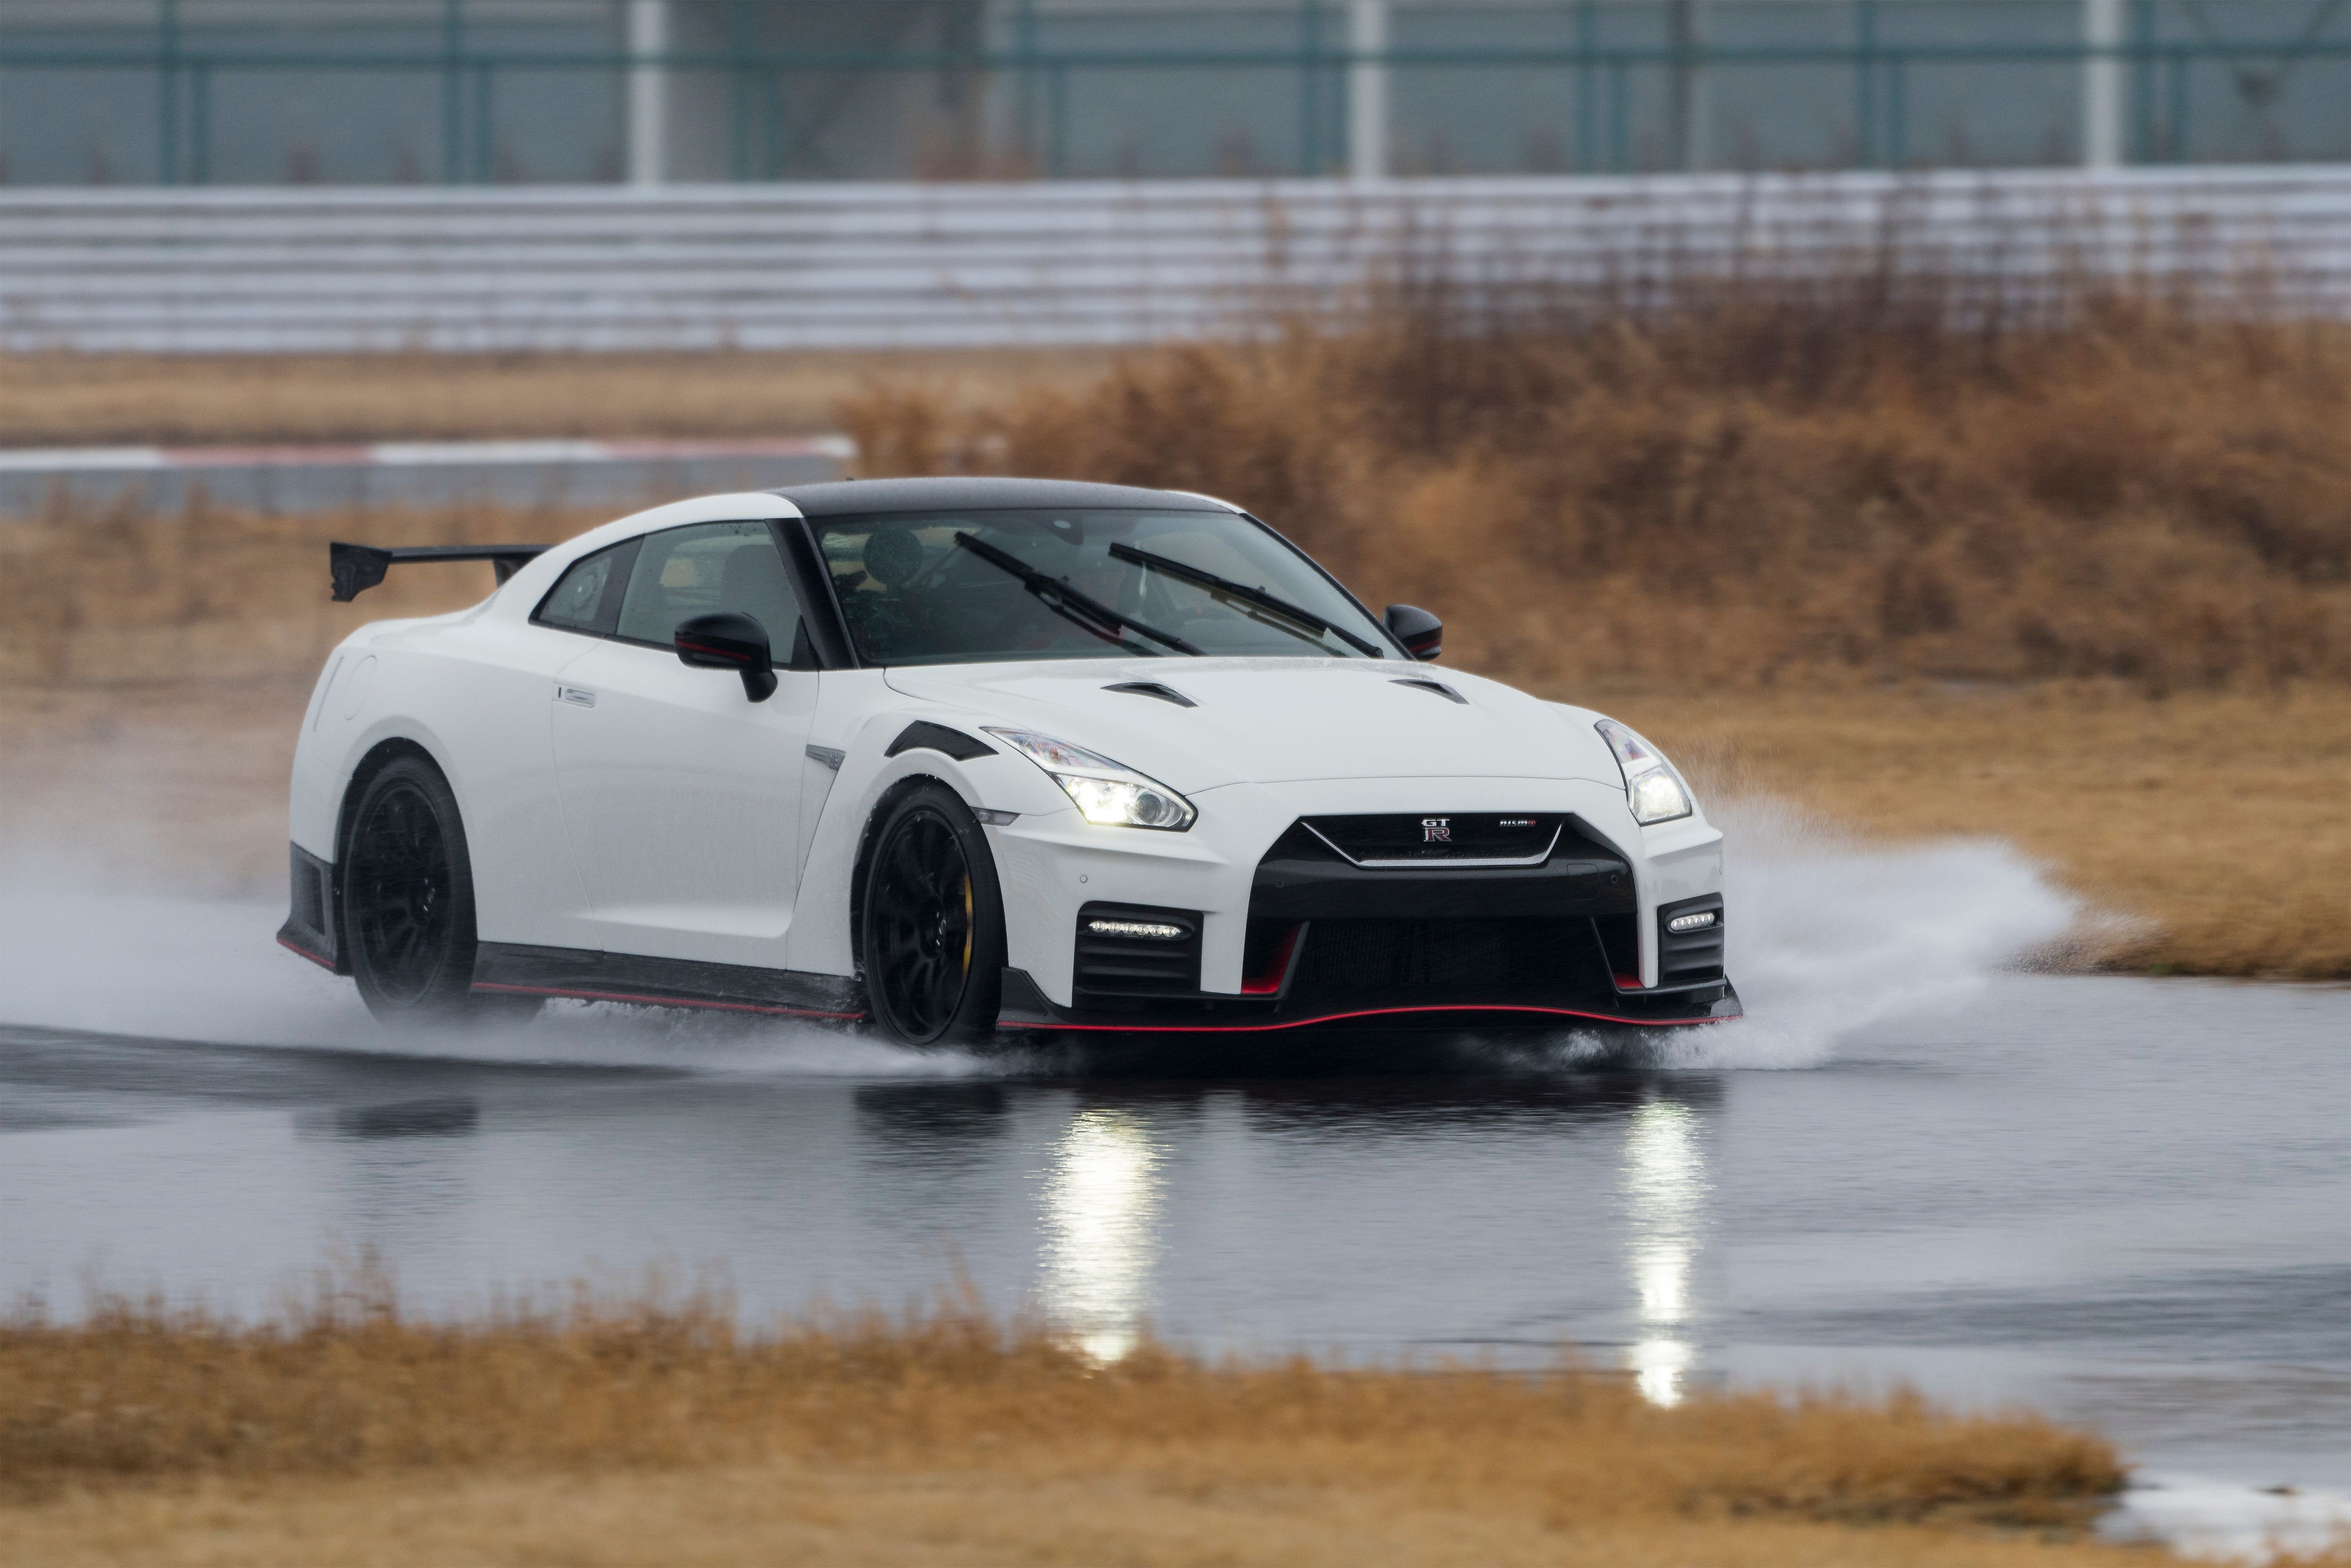 2021 The Current Nissan GT-R's Final Breath Will Be Though the GT-R50's 710-Horsepower Engine